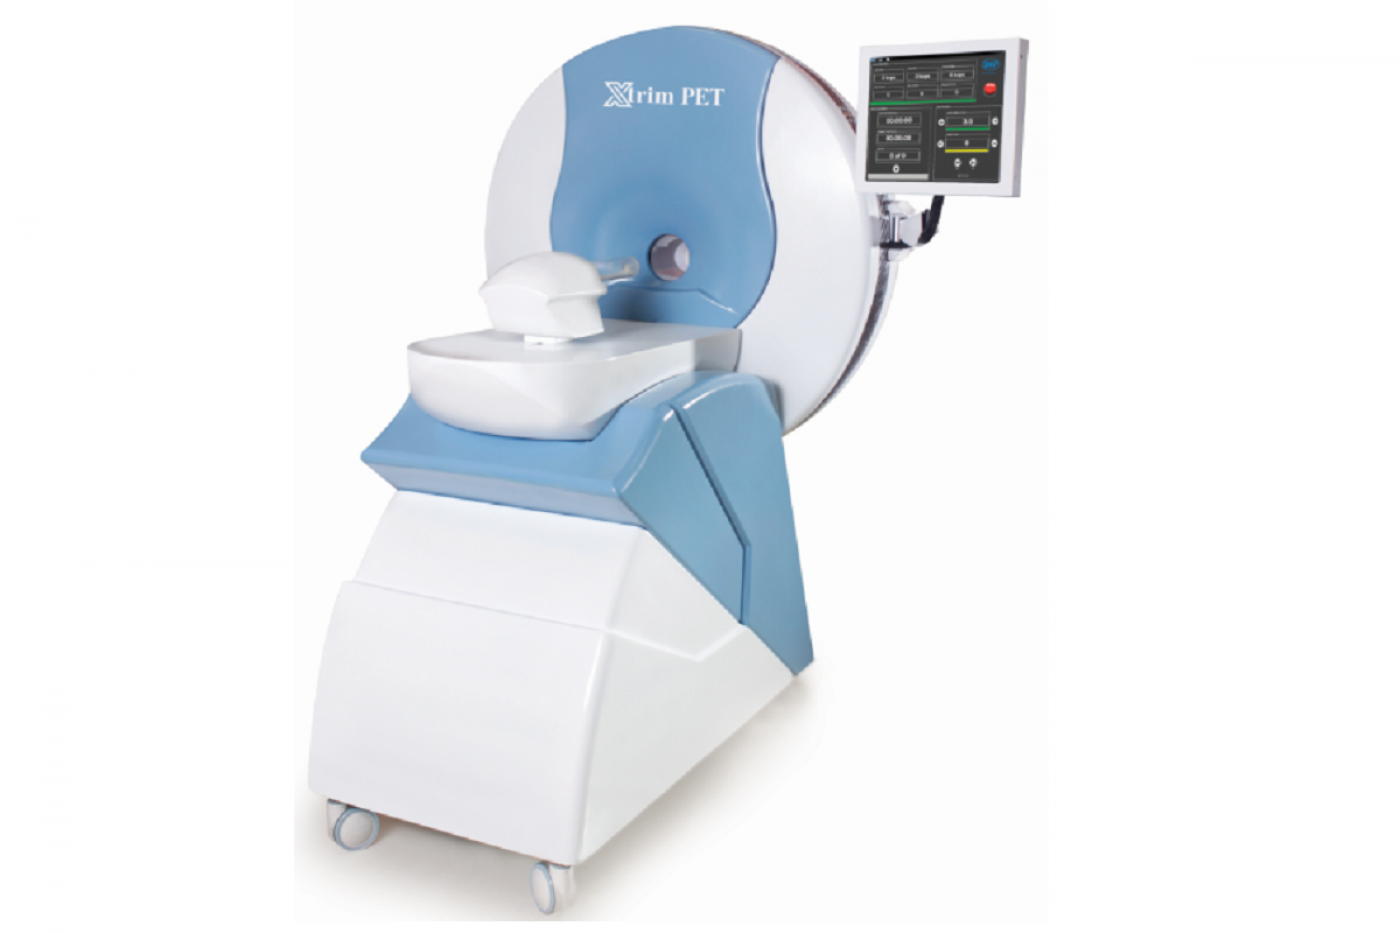 Preclinical PET Imaging System